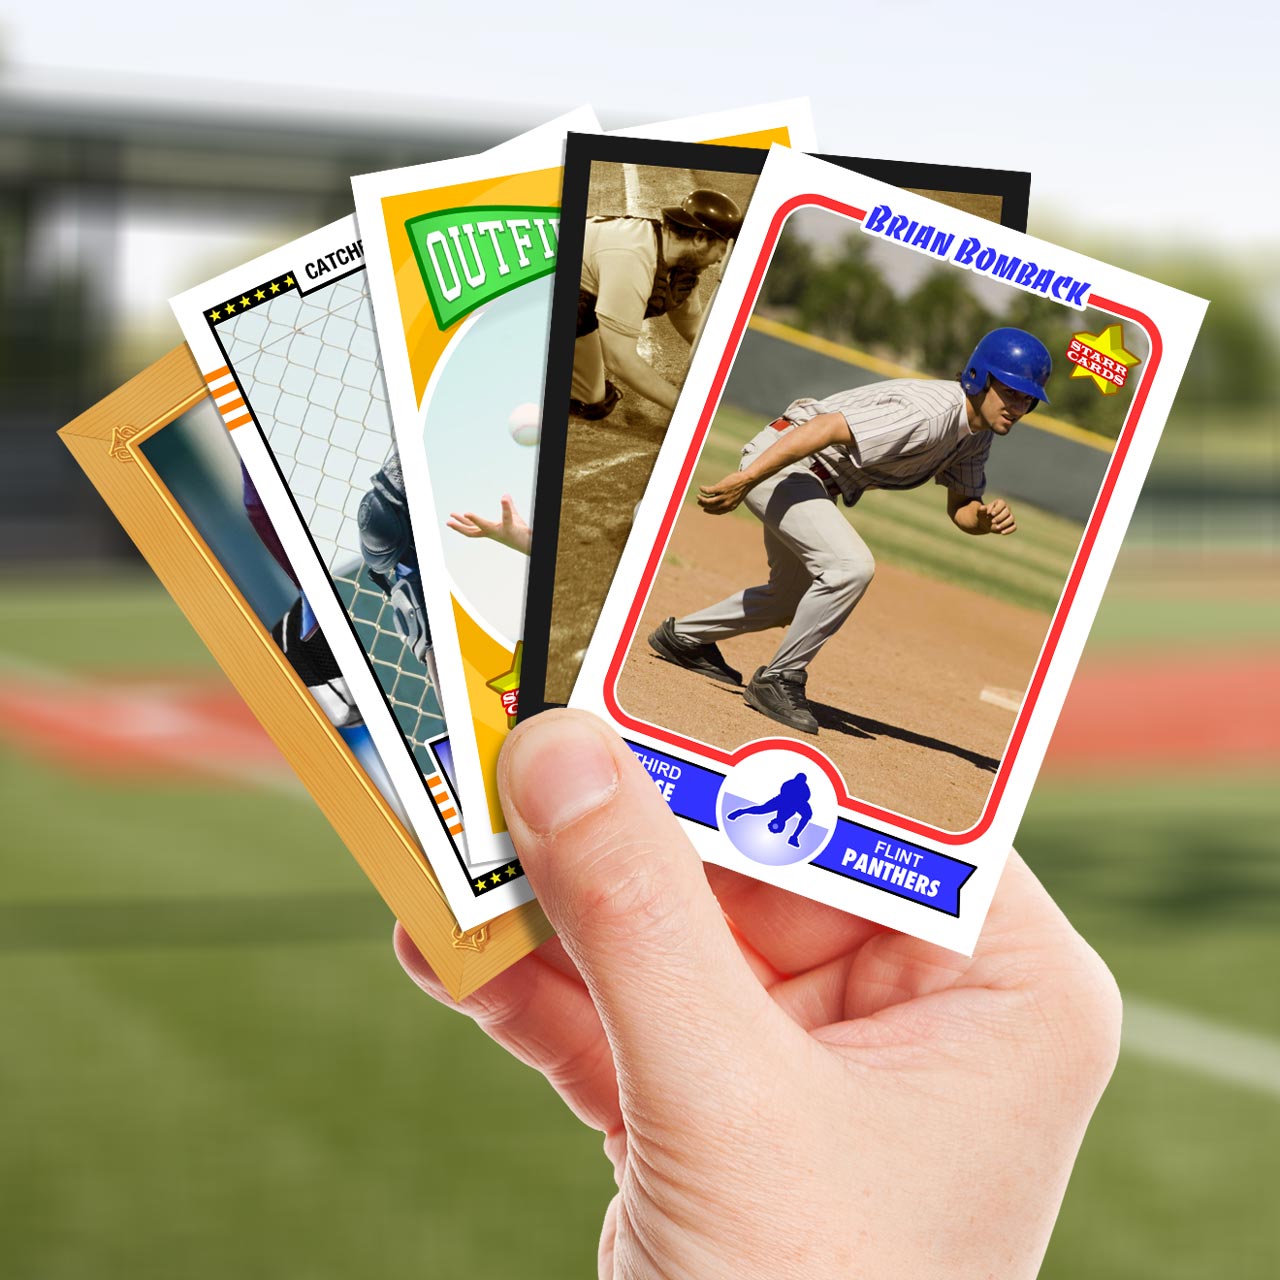 Make Your Own Baseball Card with Starr Cards